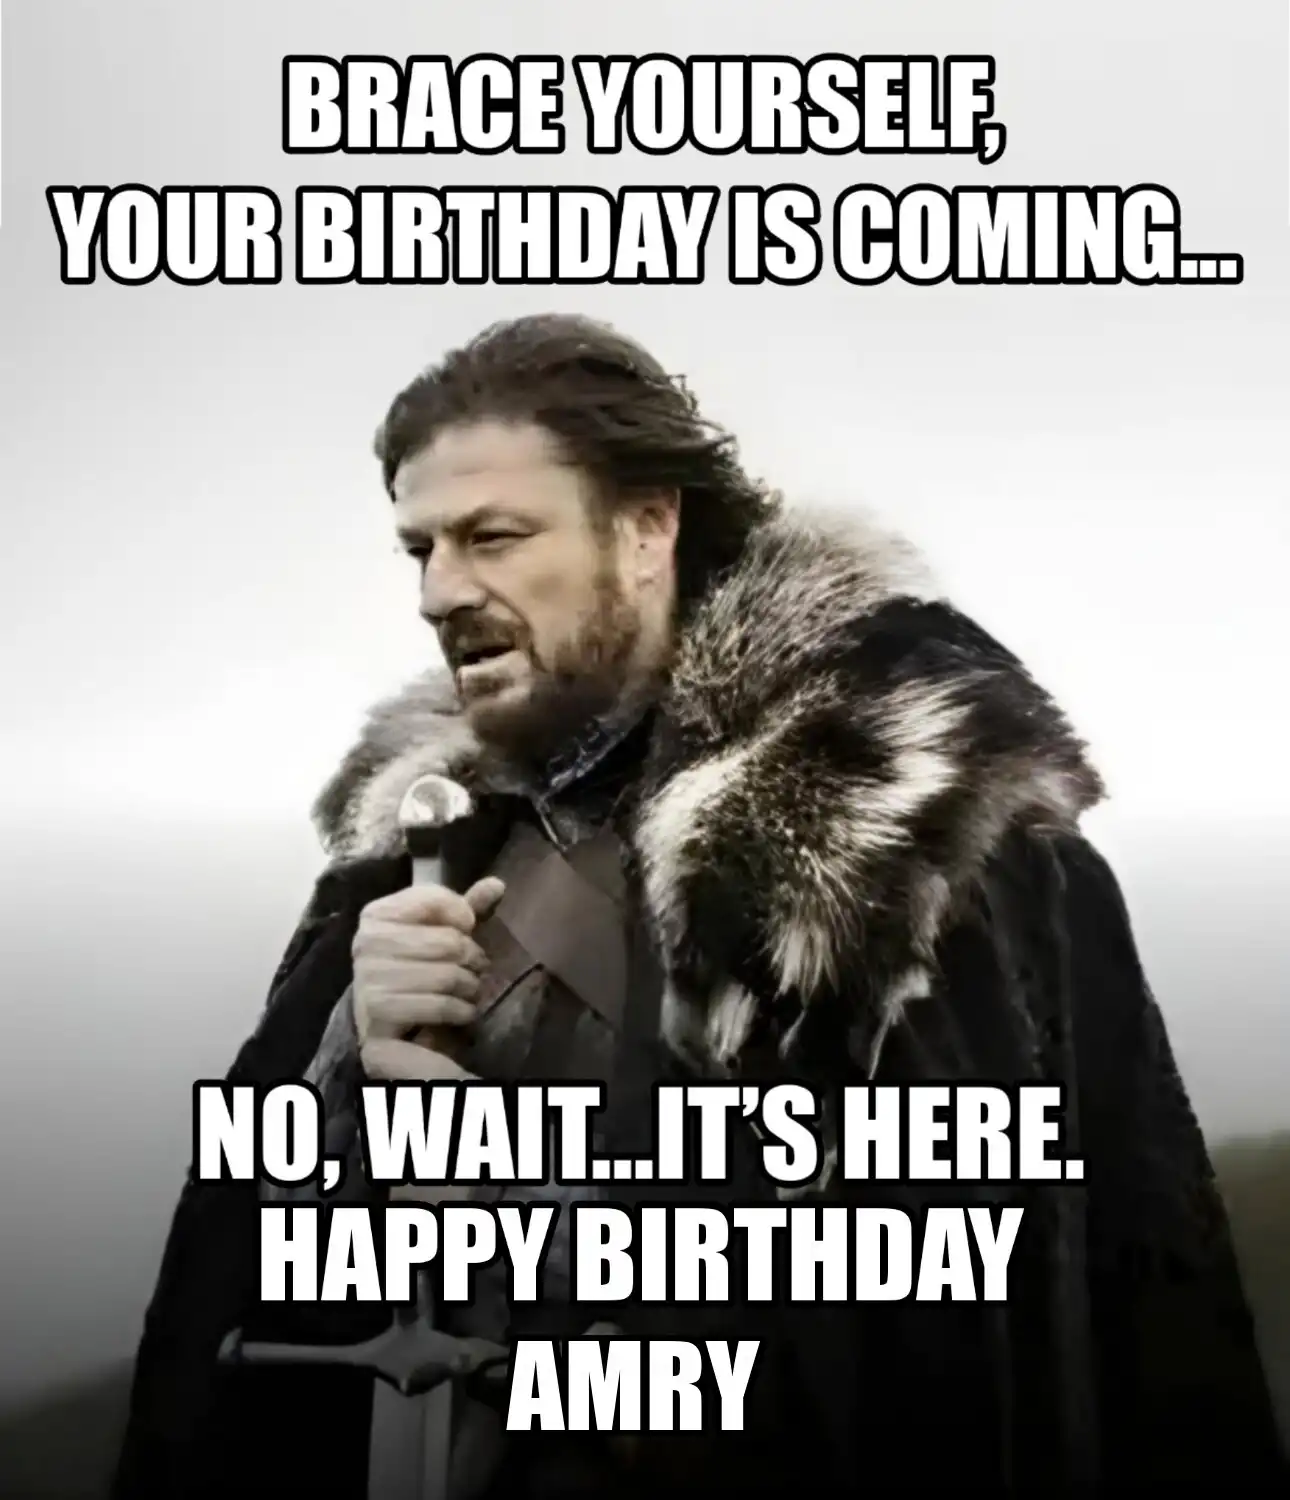 Happy Birthday Amry Brace Yourself Your Birthday Is Coming Meme